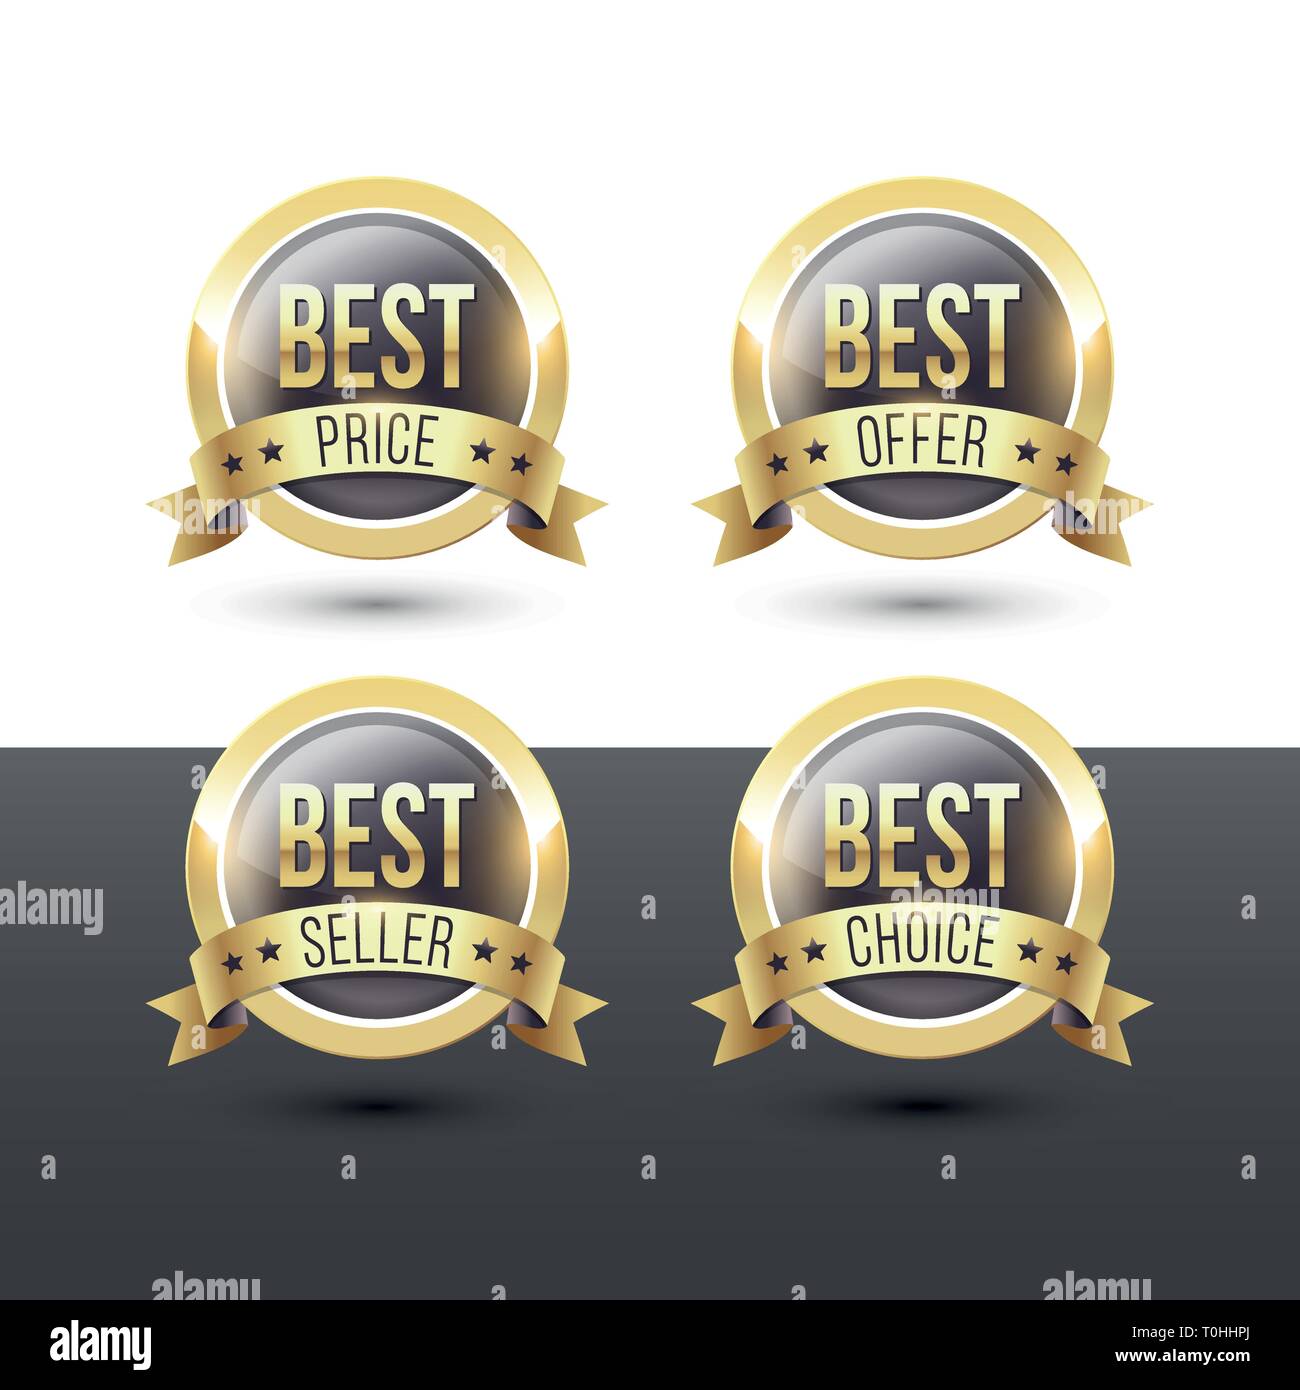 Vector icons set of round quality labels with metallic gold border and ribbon banner. Best price. Best offer. Best seller. Best choice. Stock Vector